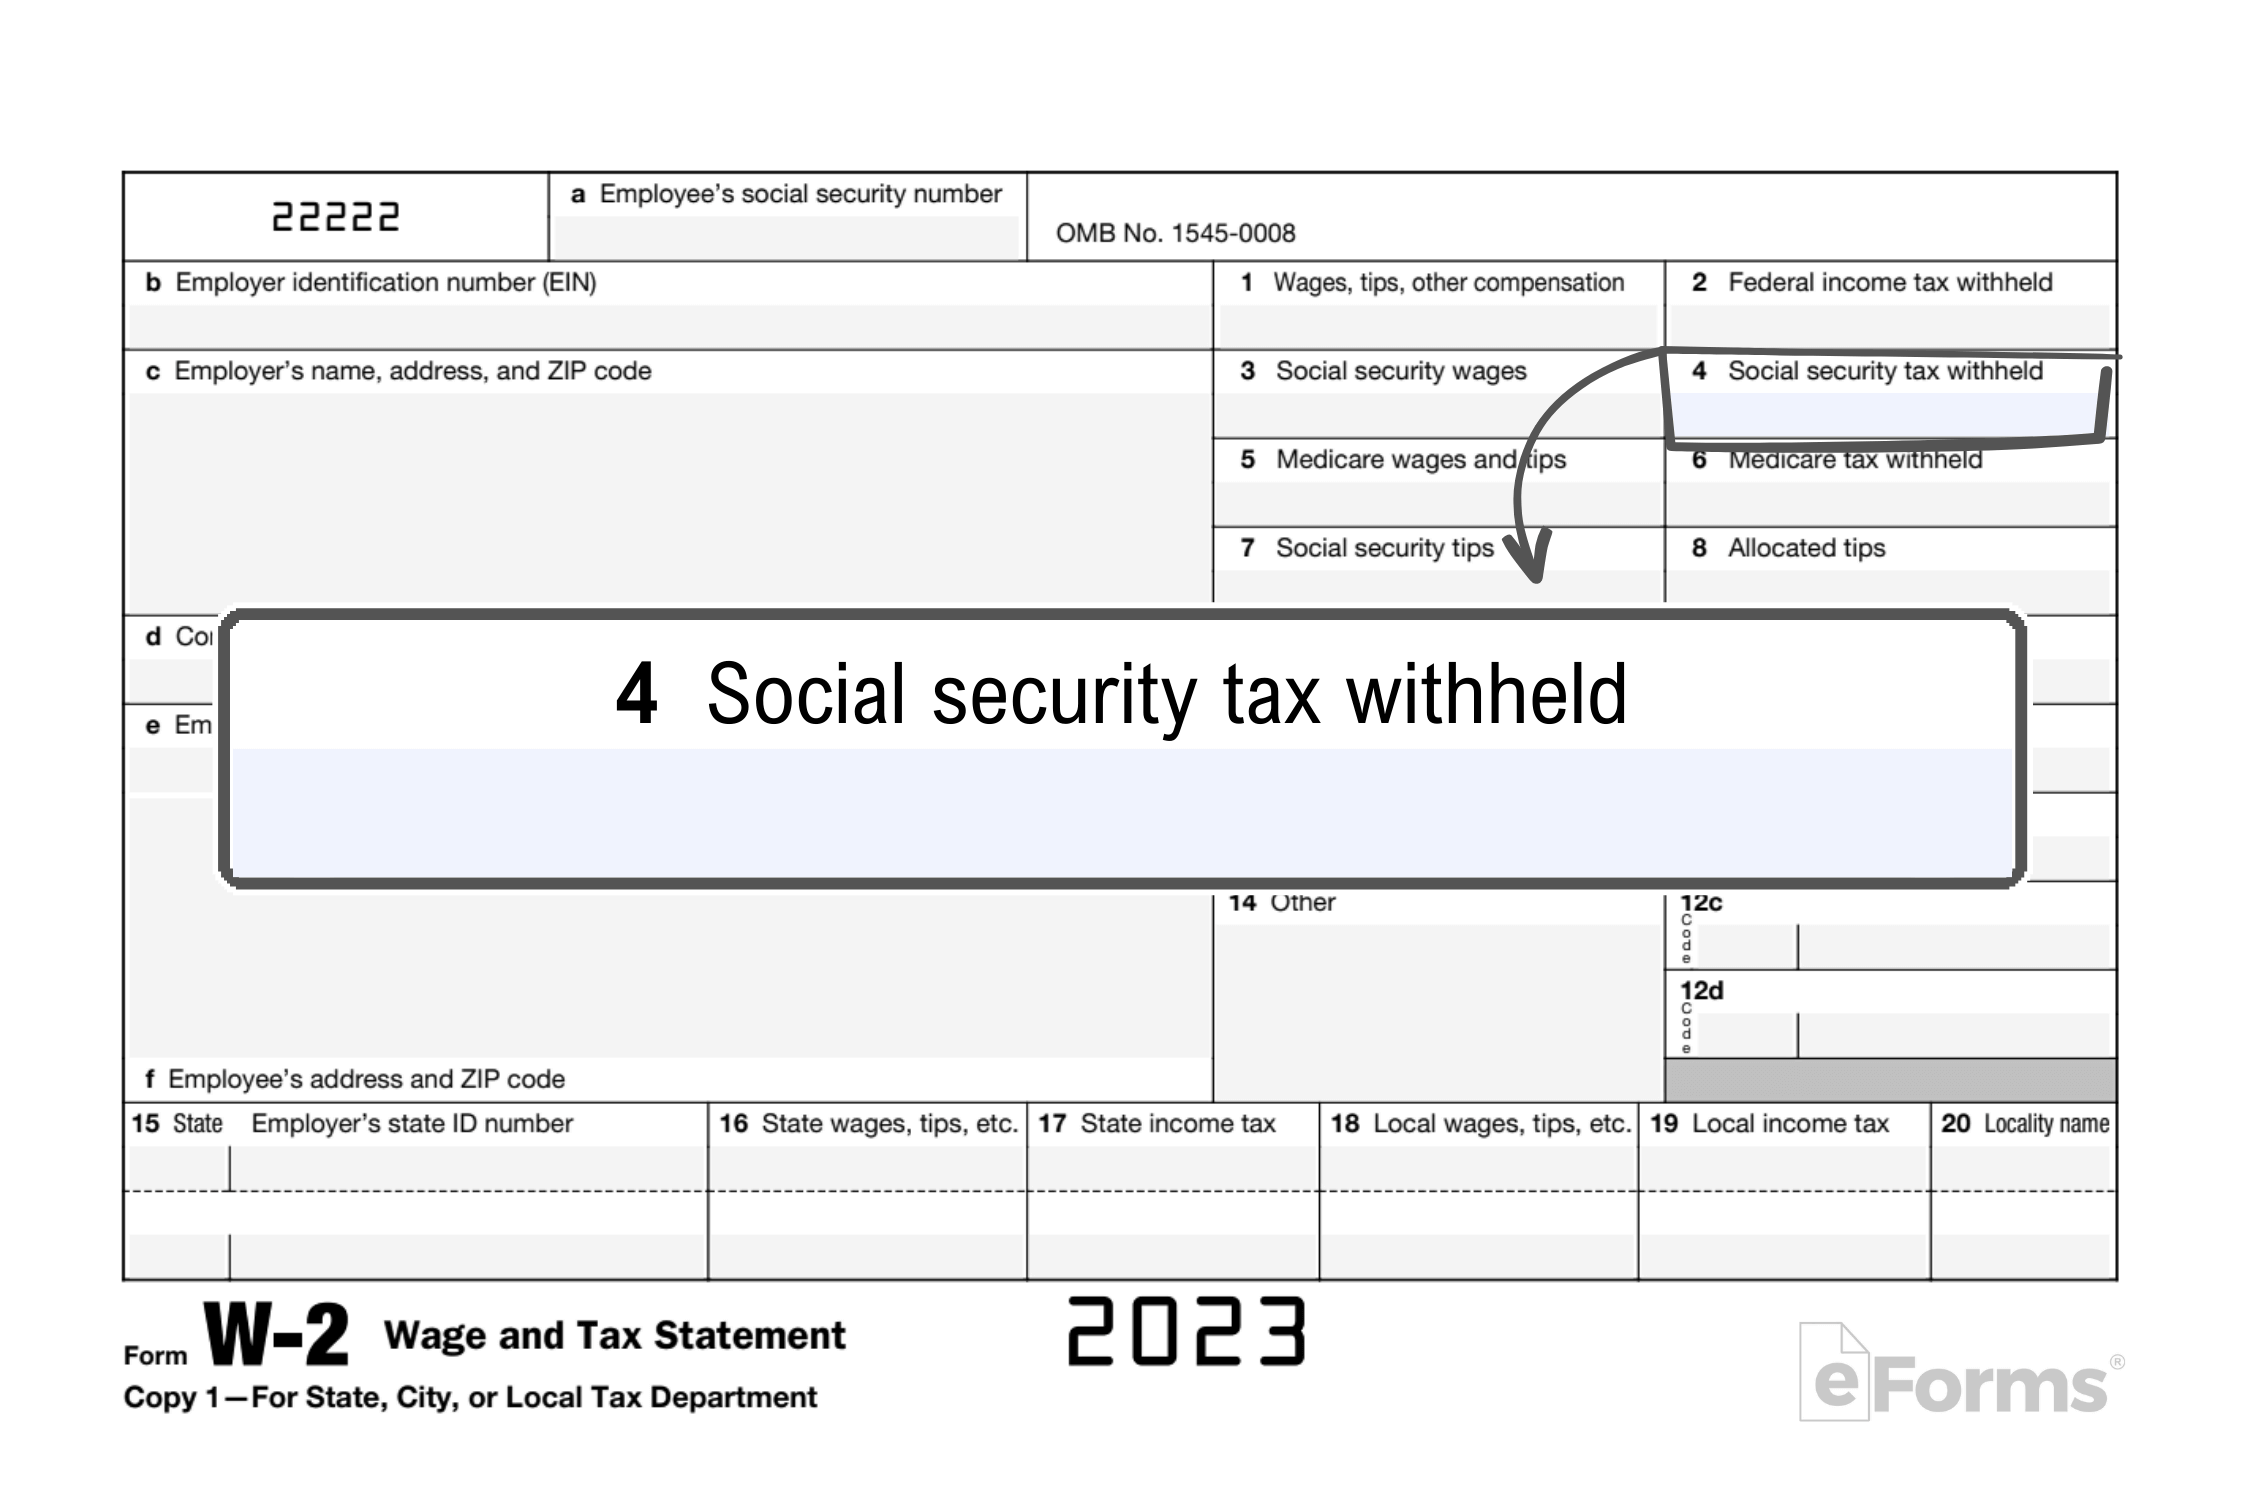 Free Irs Form W-2 | Wage And Tax Statement - Pdf – Eforms throughout Advance Auto Parts W2 Former Employee